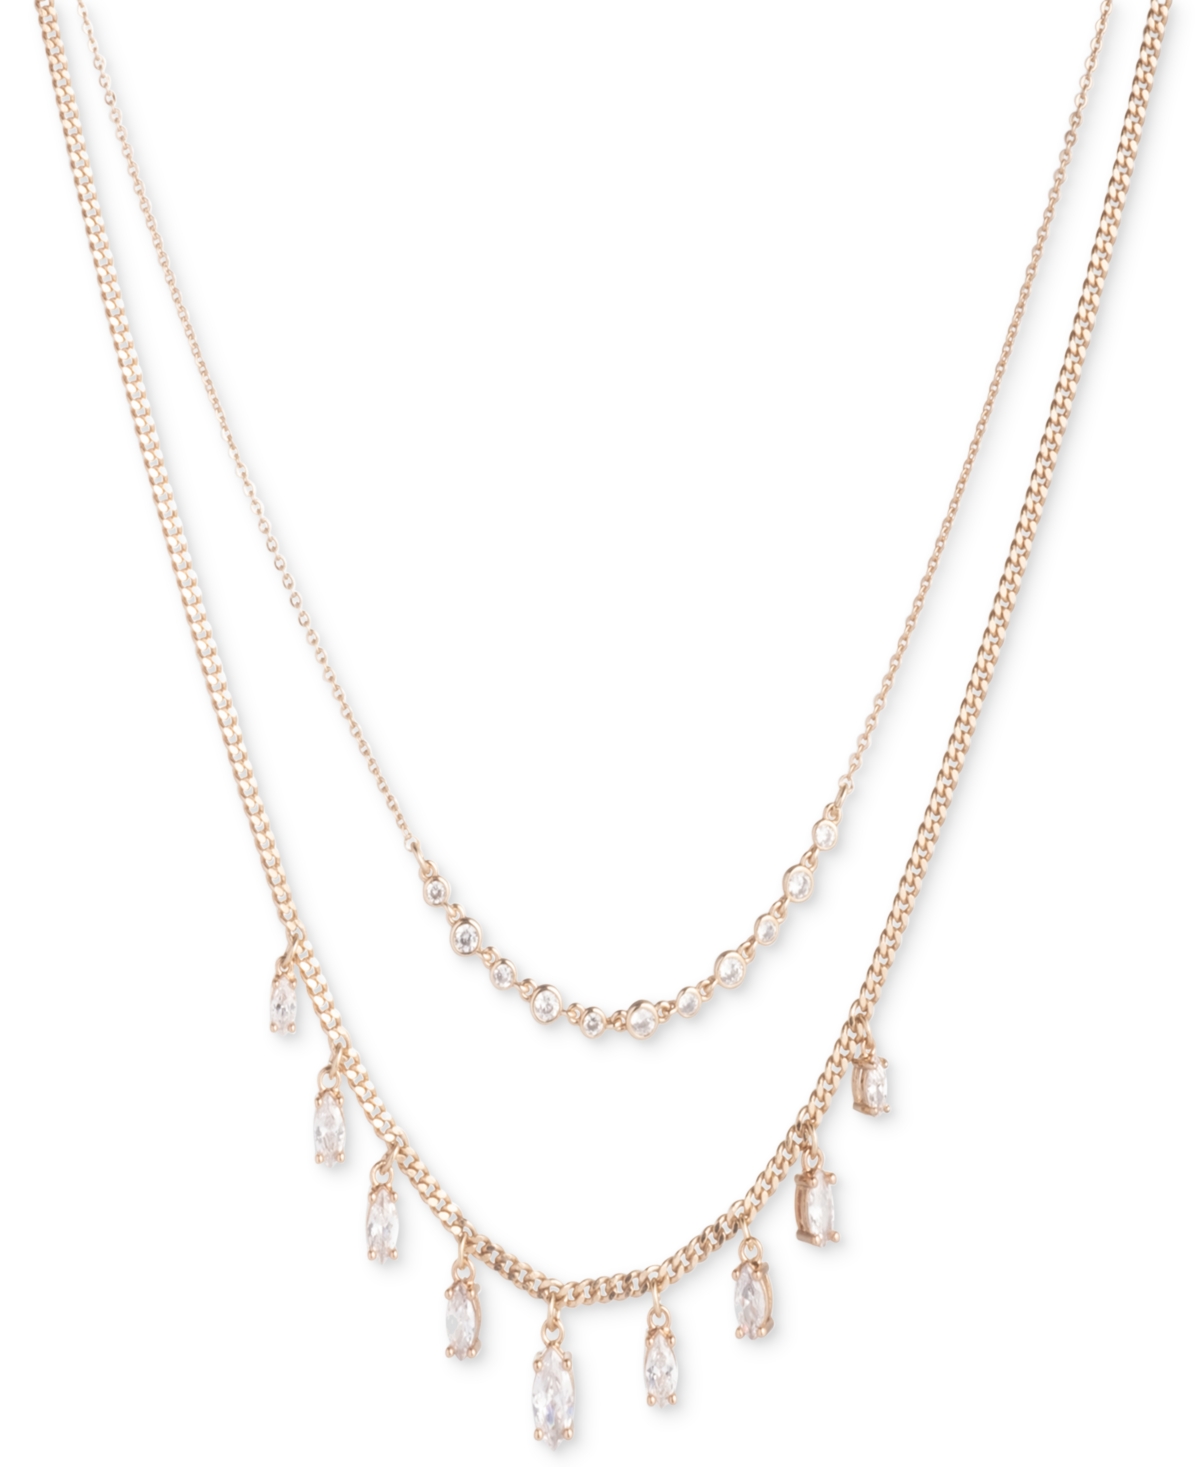 Gold-Tone Cubic Zirconia Layered Statement Necklace, 16" + 3" extender - White